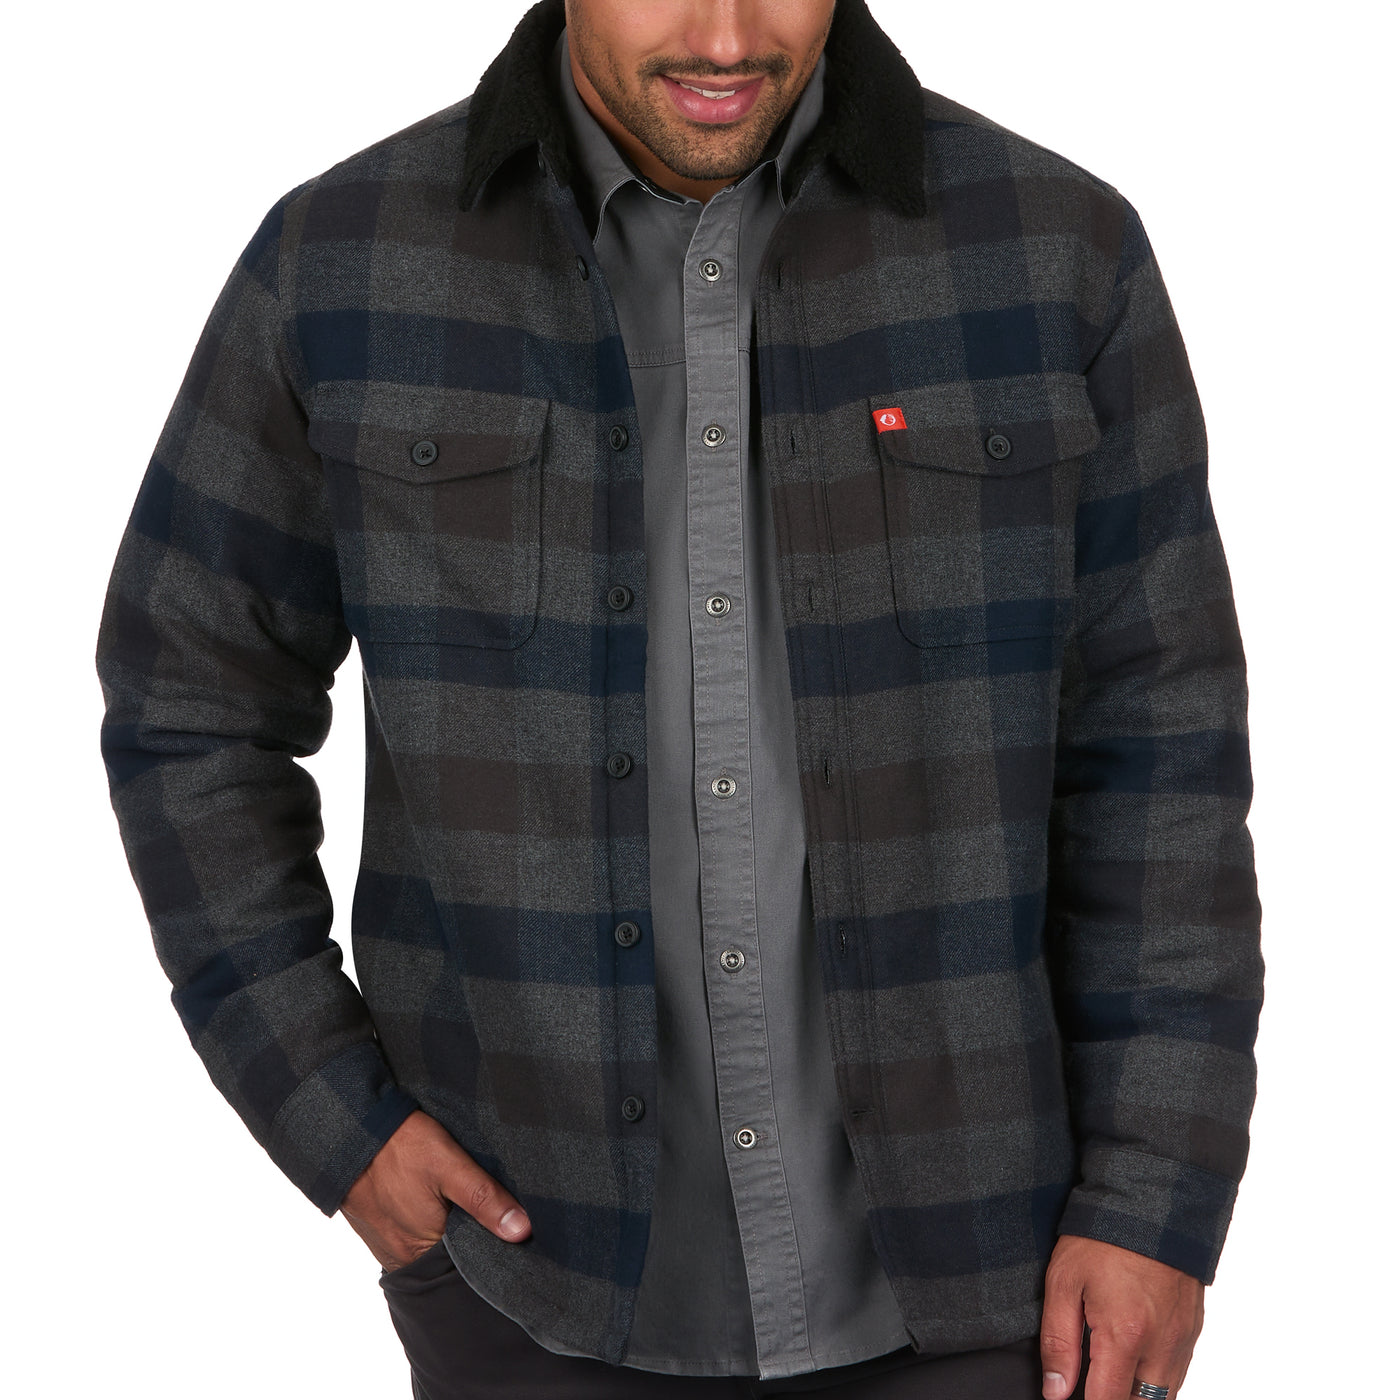 Men's Flannel Shirt Jacket - Shirtjac with Sherpa Fleece Lining & Collar Red/Black / Medium - The American Outdoorsman